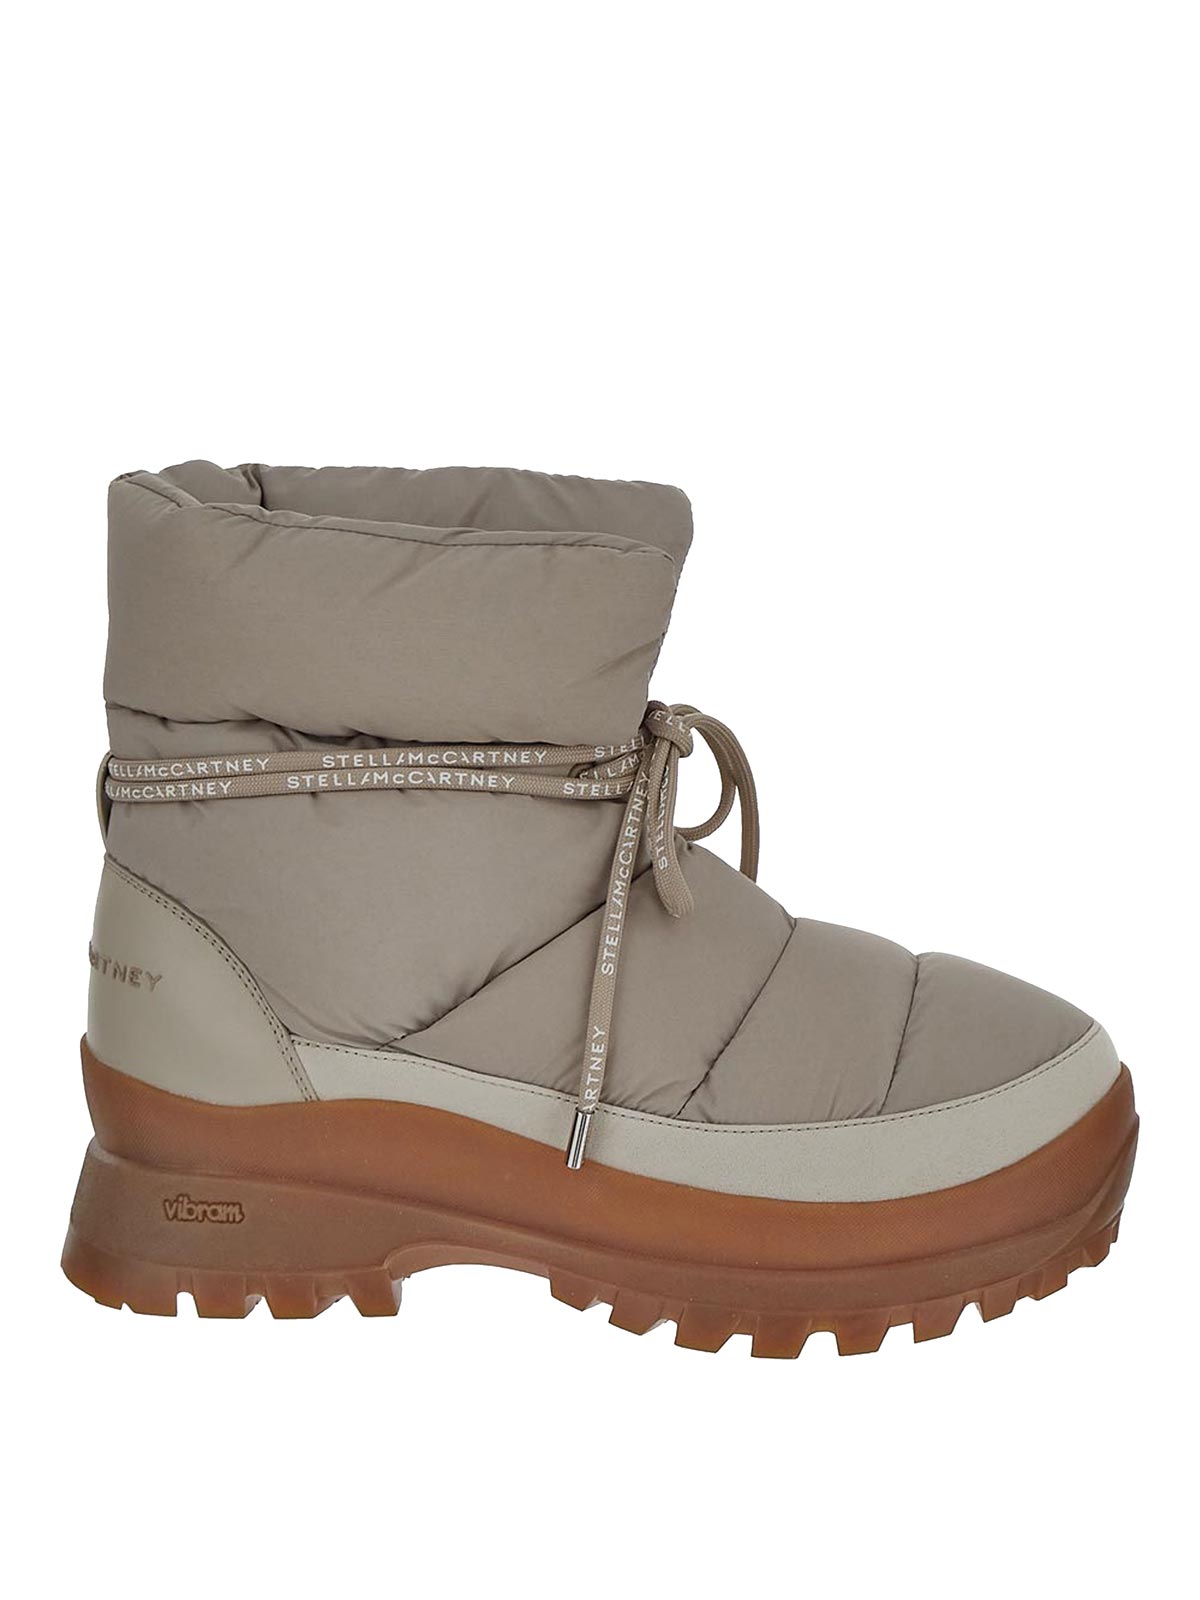 Shop Stella Mccartney Winter Boots In Beige With Branded Laces